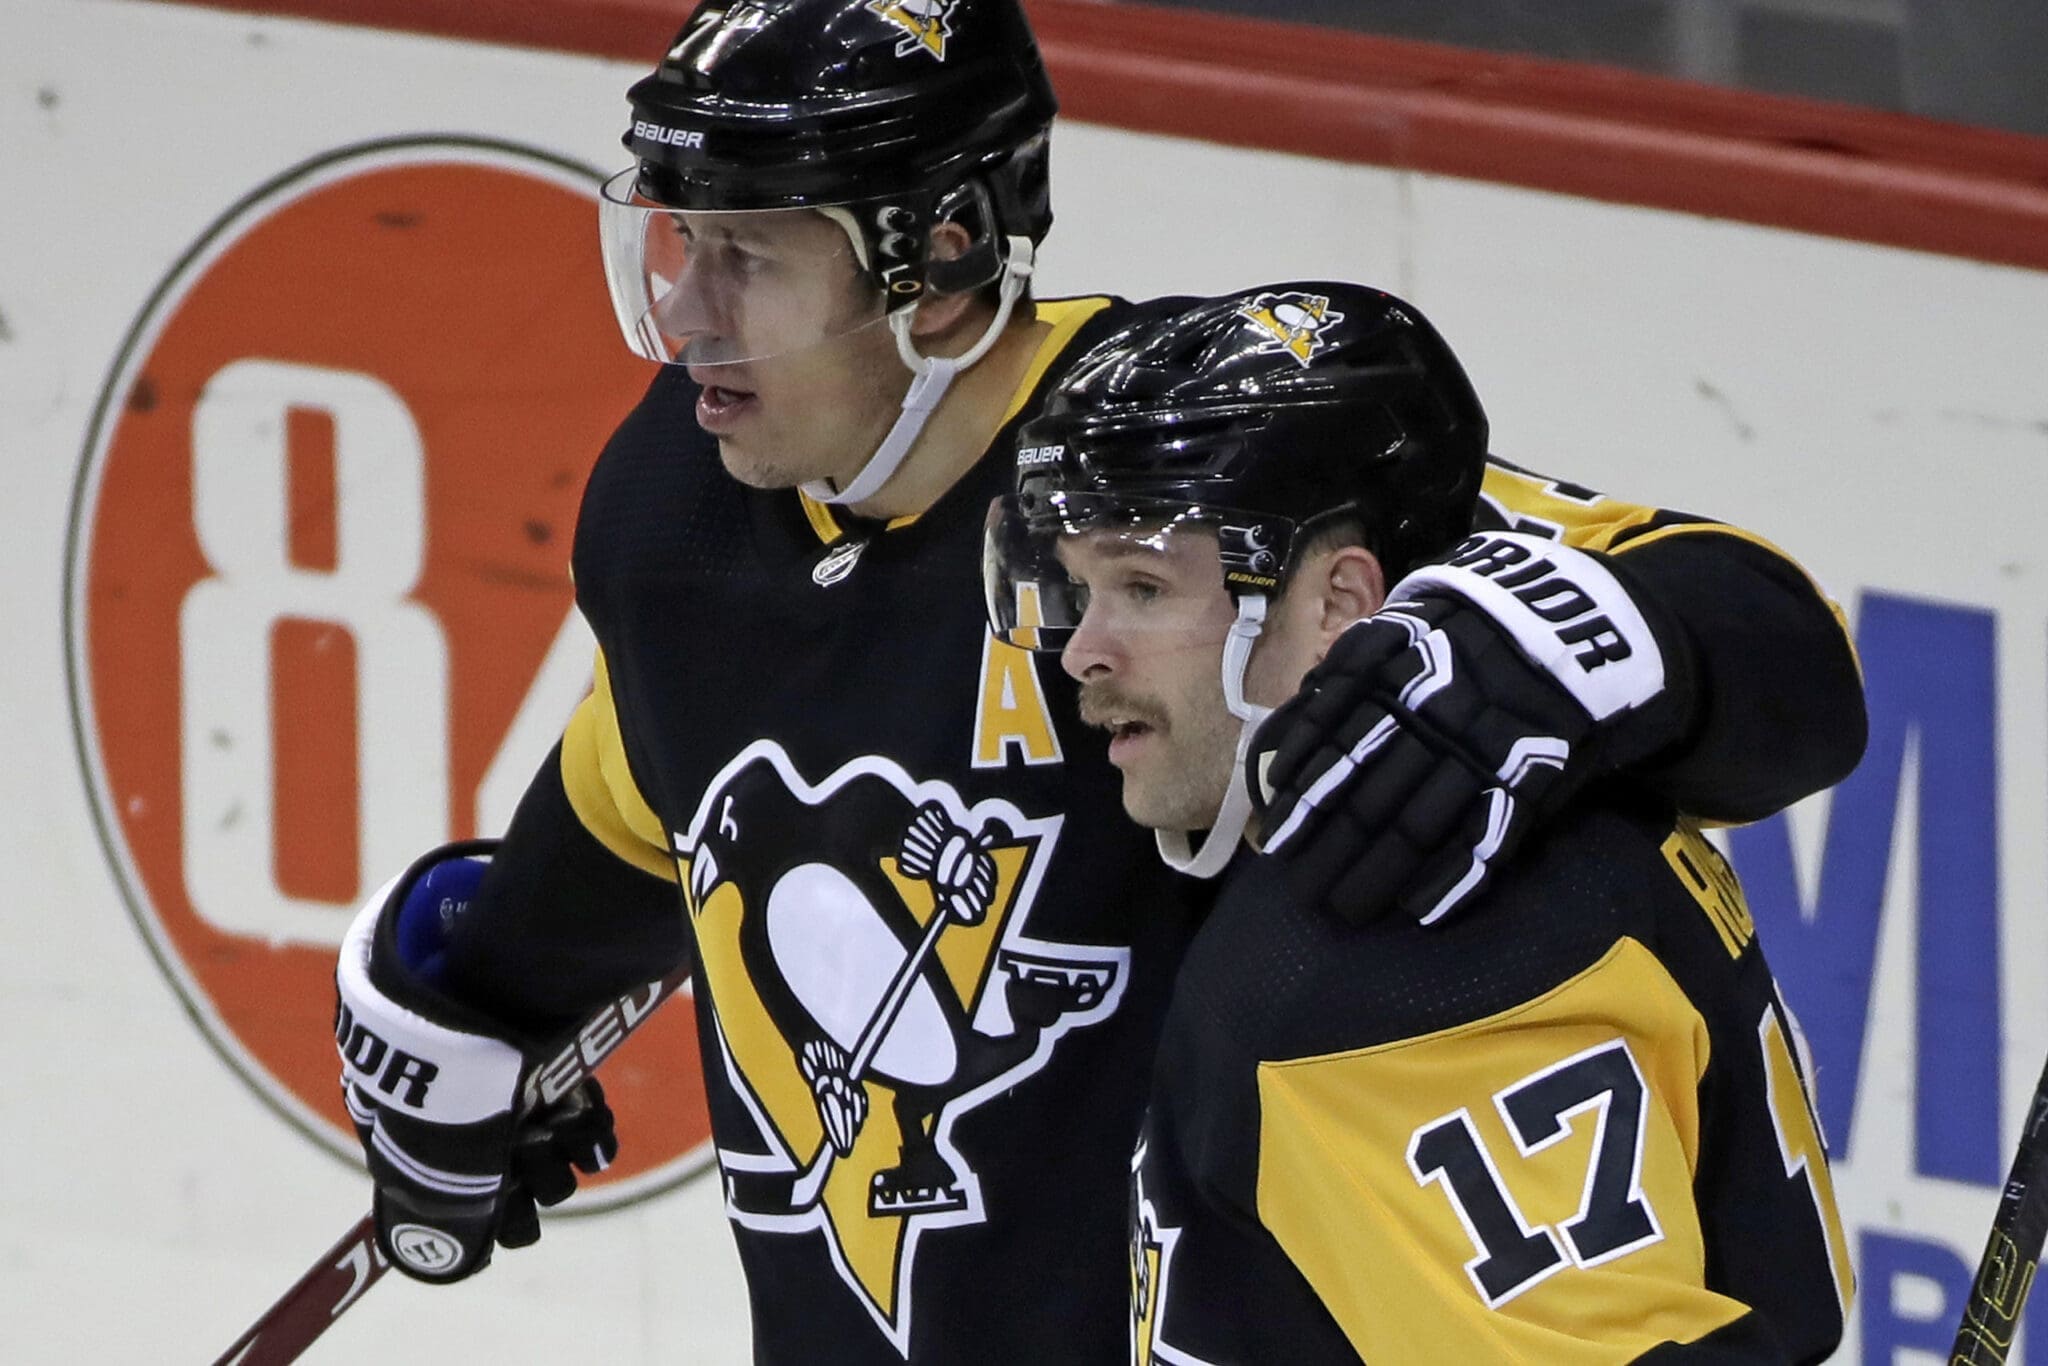 New Penguins Lines, Rust with Malkin Preseason Game 3, Notes and What to Watch